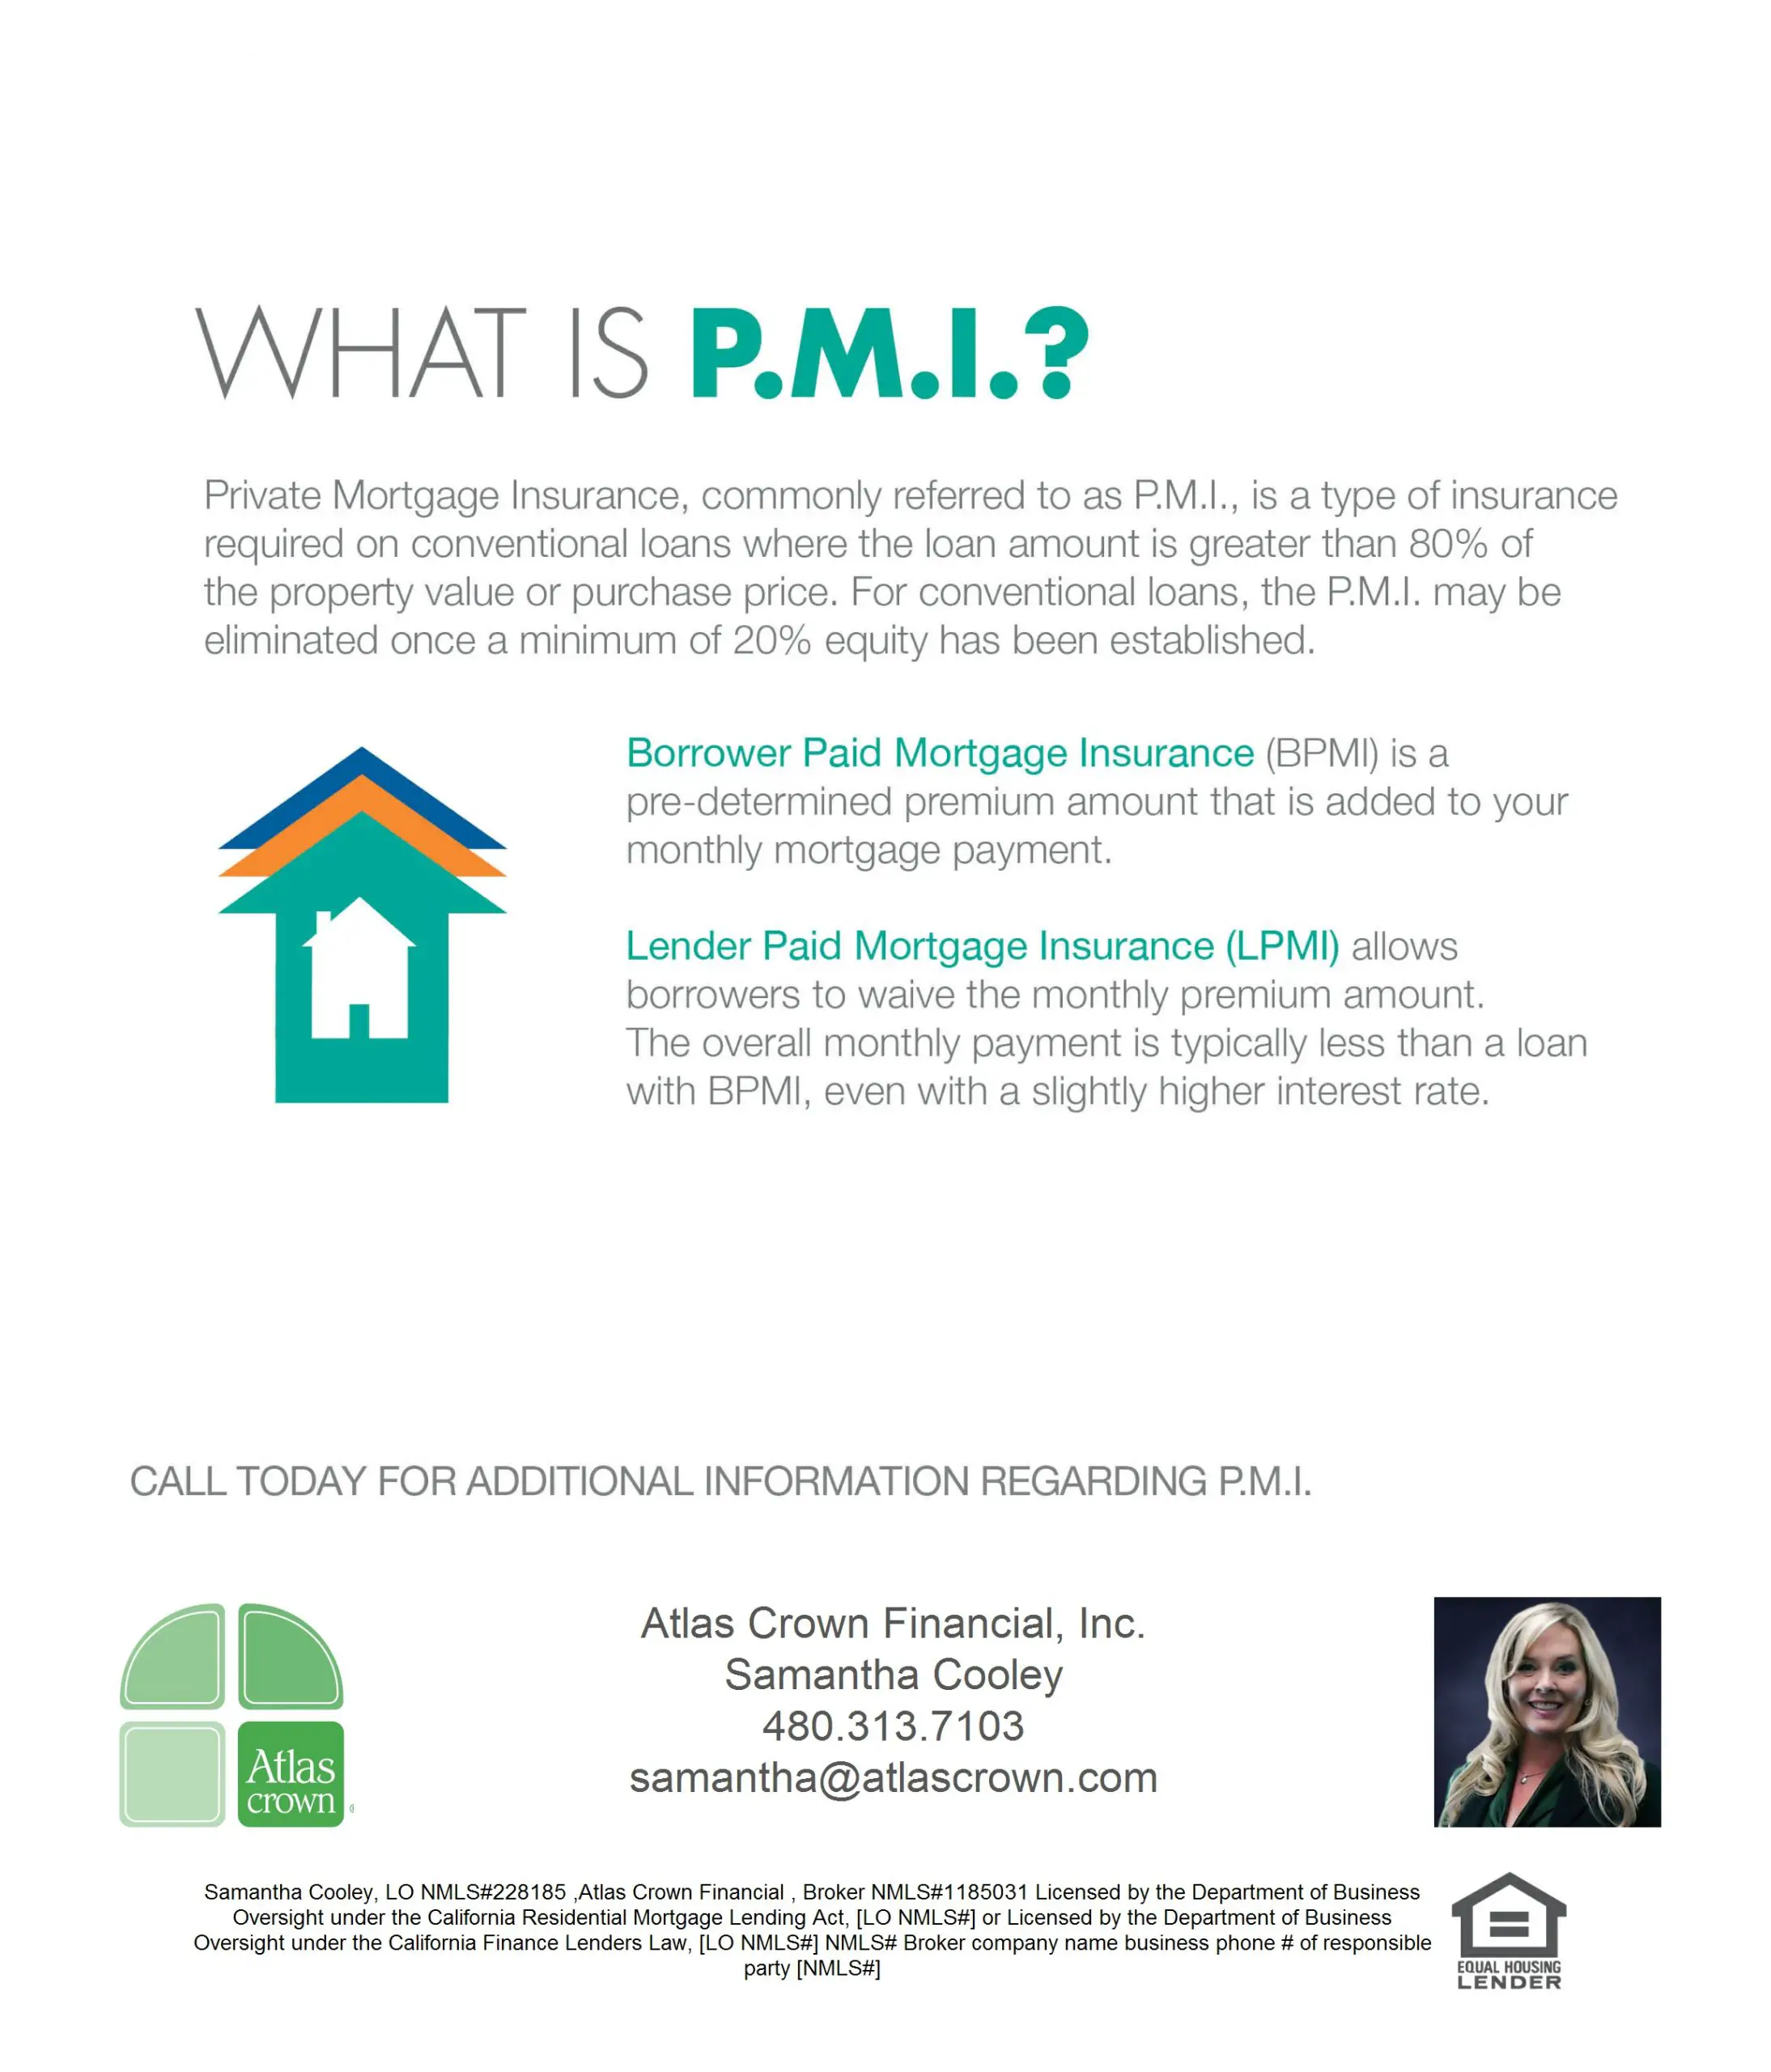 Pmi Insurance Cost : 5 Ways To Get A Loan Without Private Mortgage ...